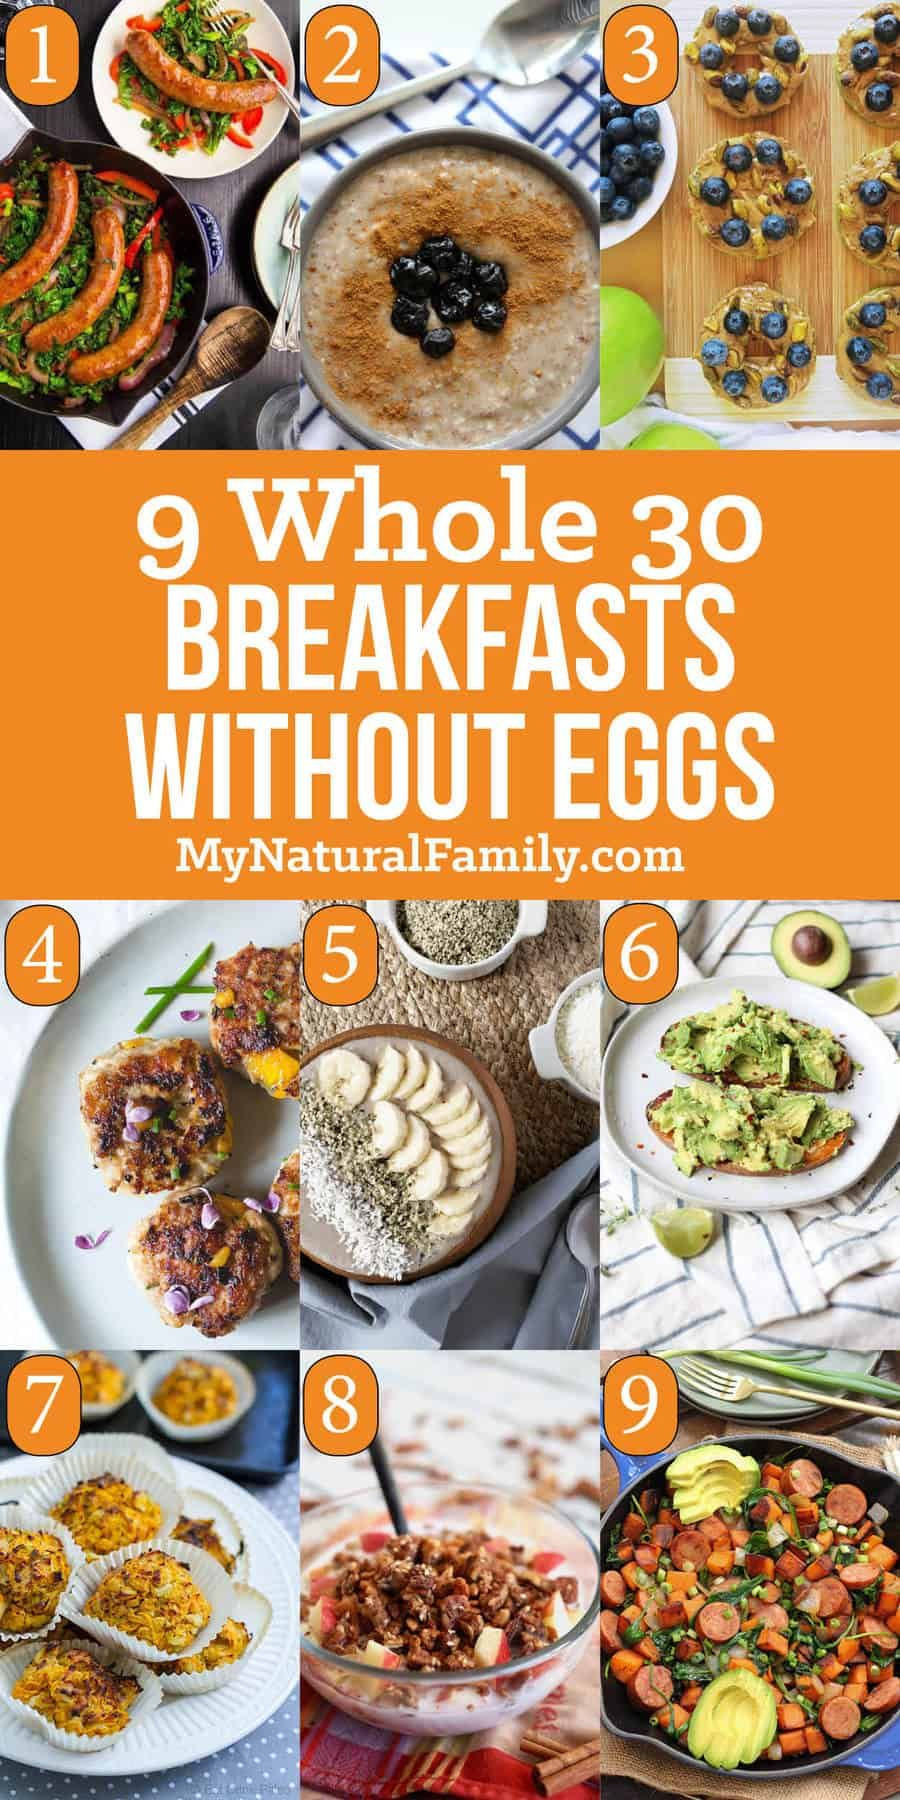 Healthy Breakfast Without Eggs
 The Best Whole 30 Breakfast Recipes